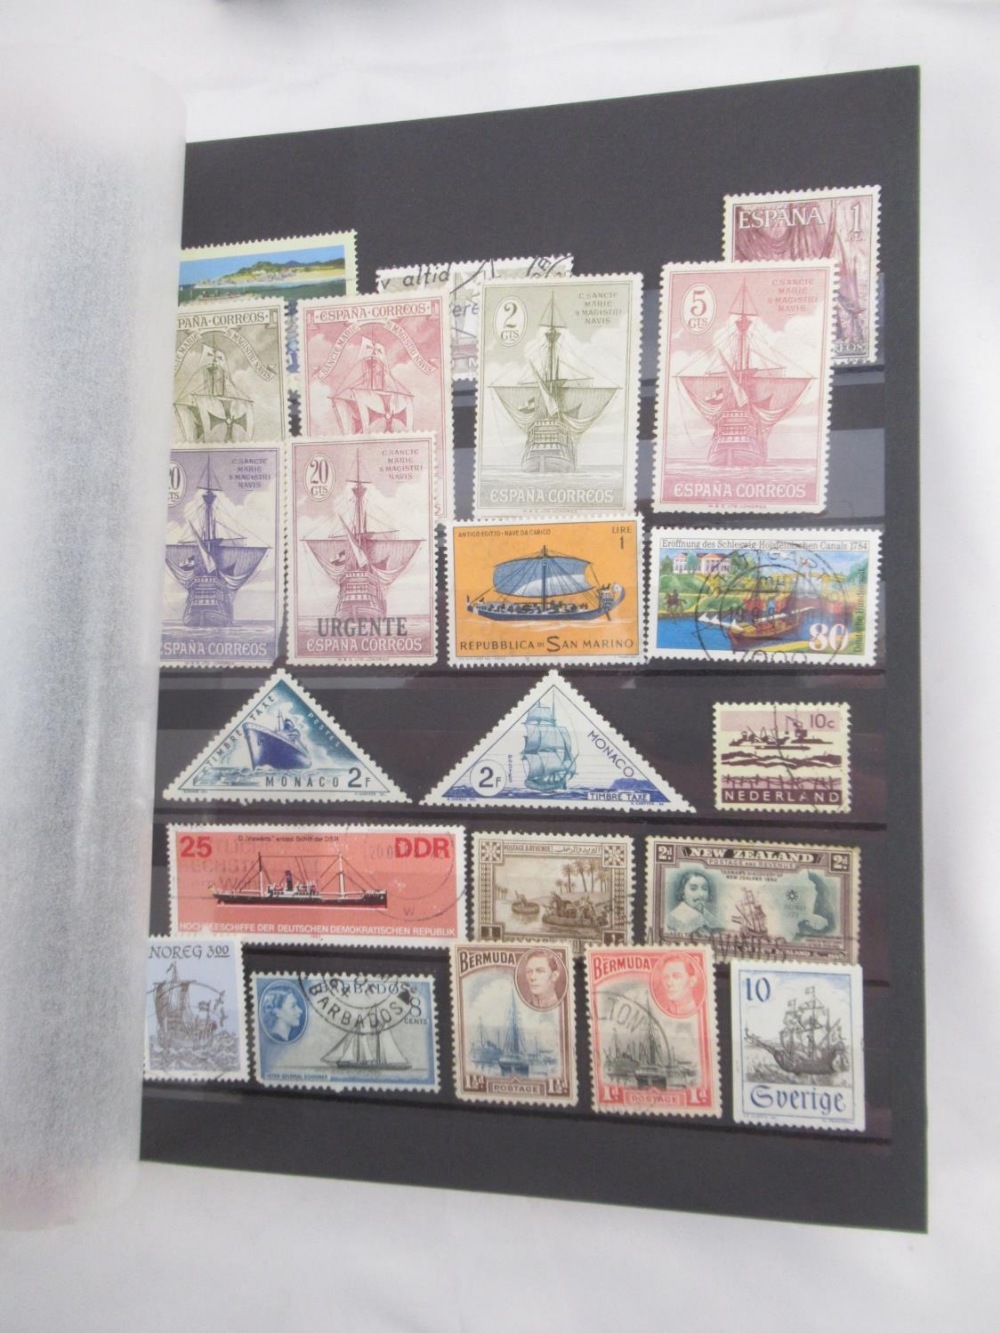 Stamp album cont. various international Aircraft stamps, stamp folder cont. stamps from Iran( - Image 21 of 21